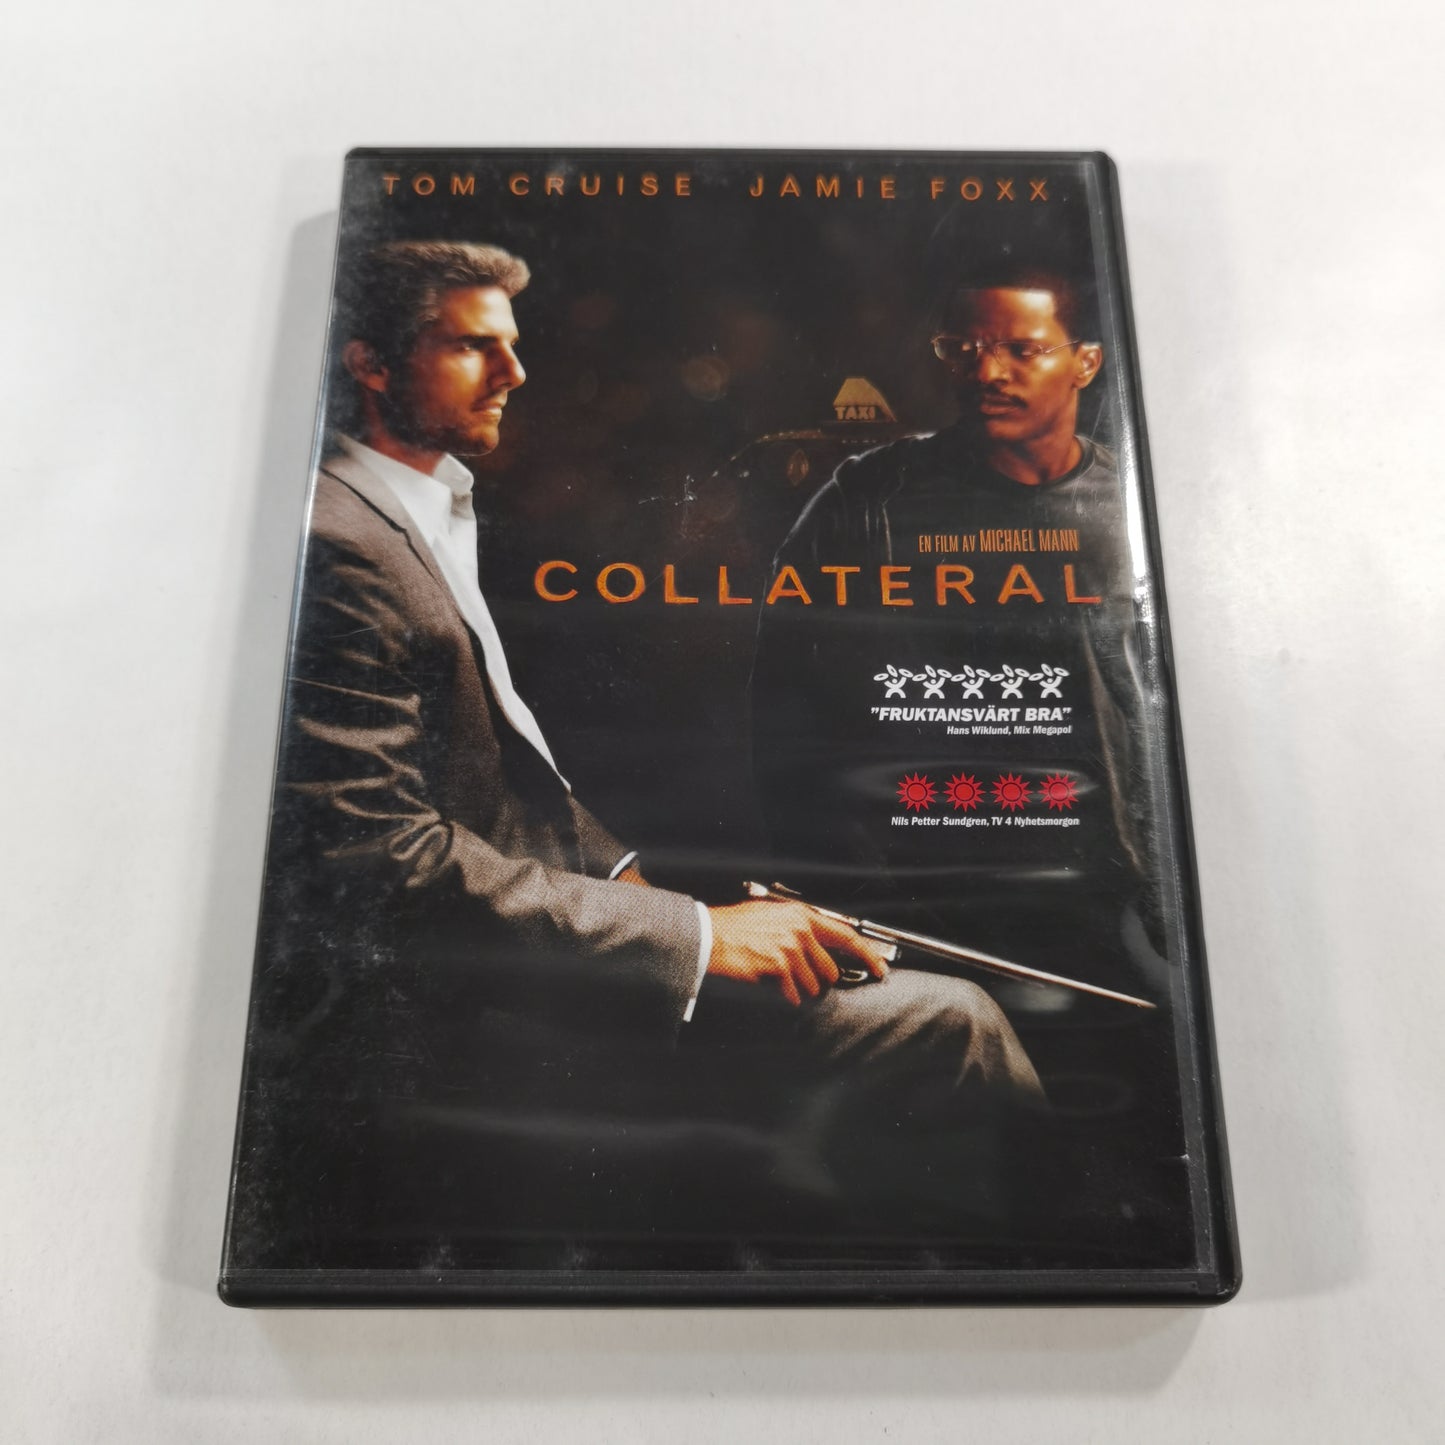 Collateral (2004) - DVD SE 2005